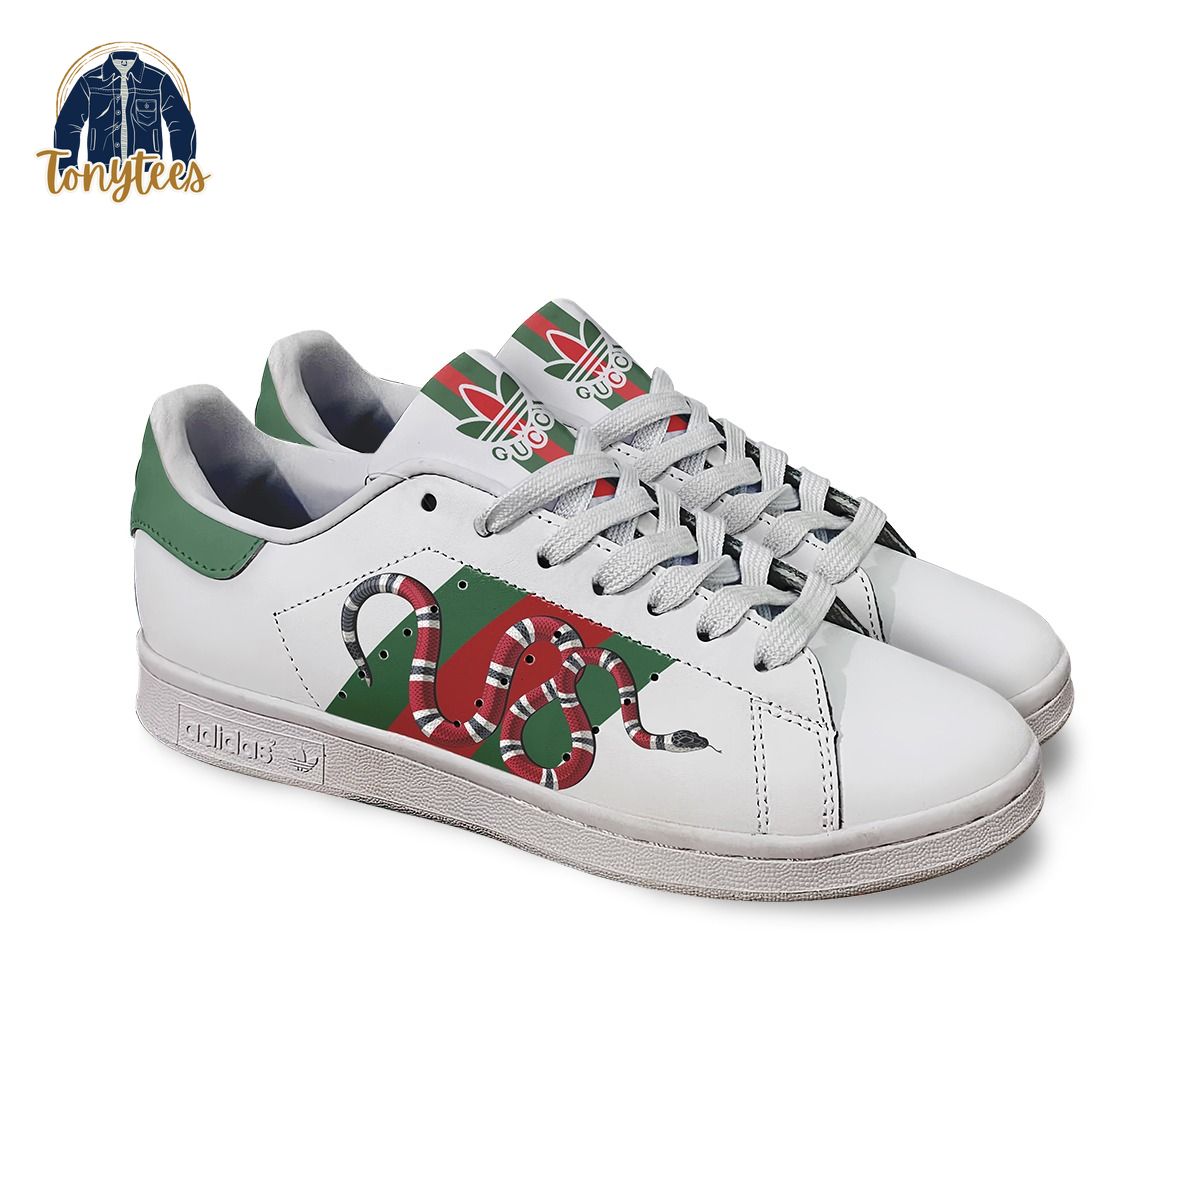 Gucci Snake Adidas Stan Smith Sneaker Luxury Brand Shoes